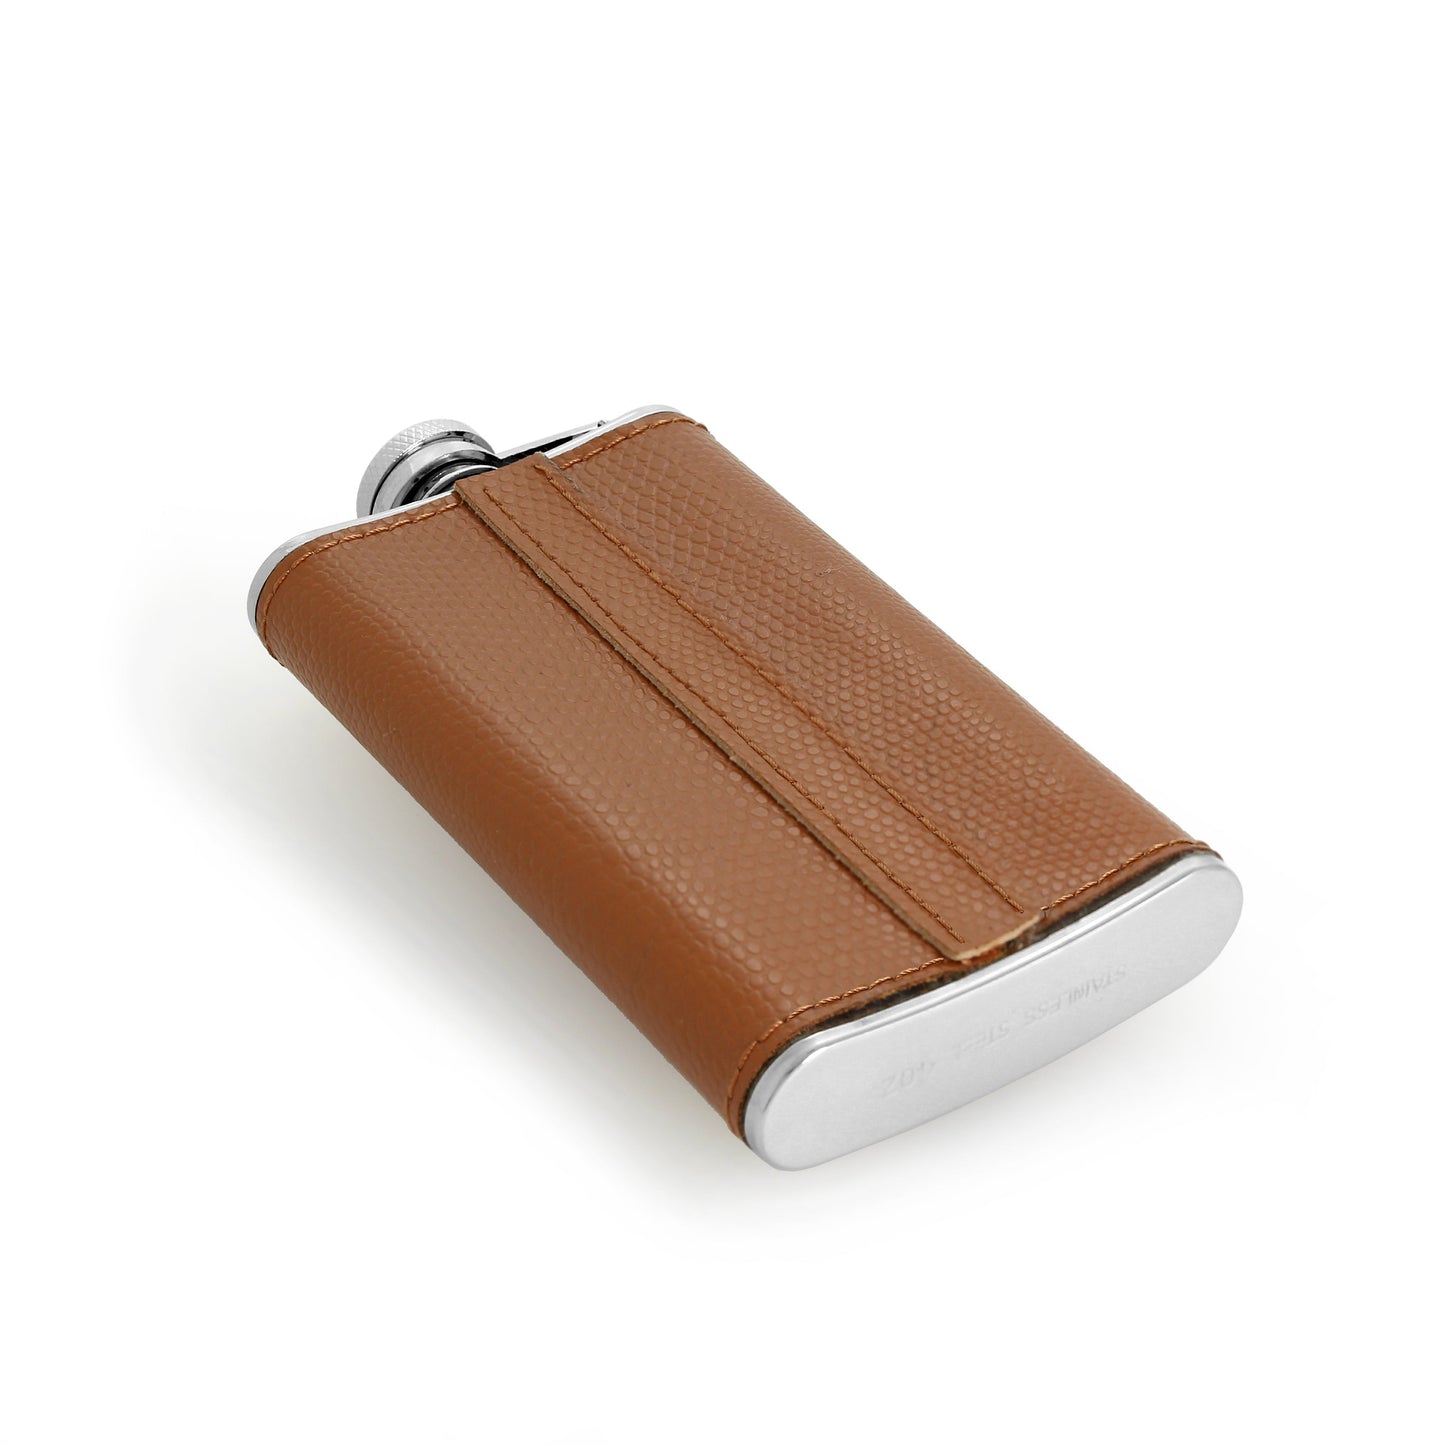 4oz Stainless Steel & Genuine Tan Leather Engravable Hip Flask w Funnel